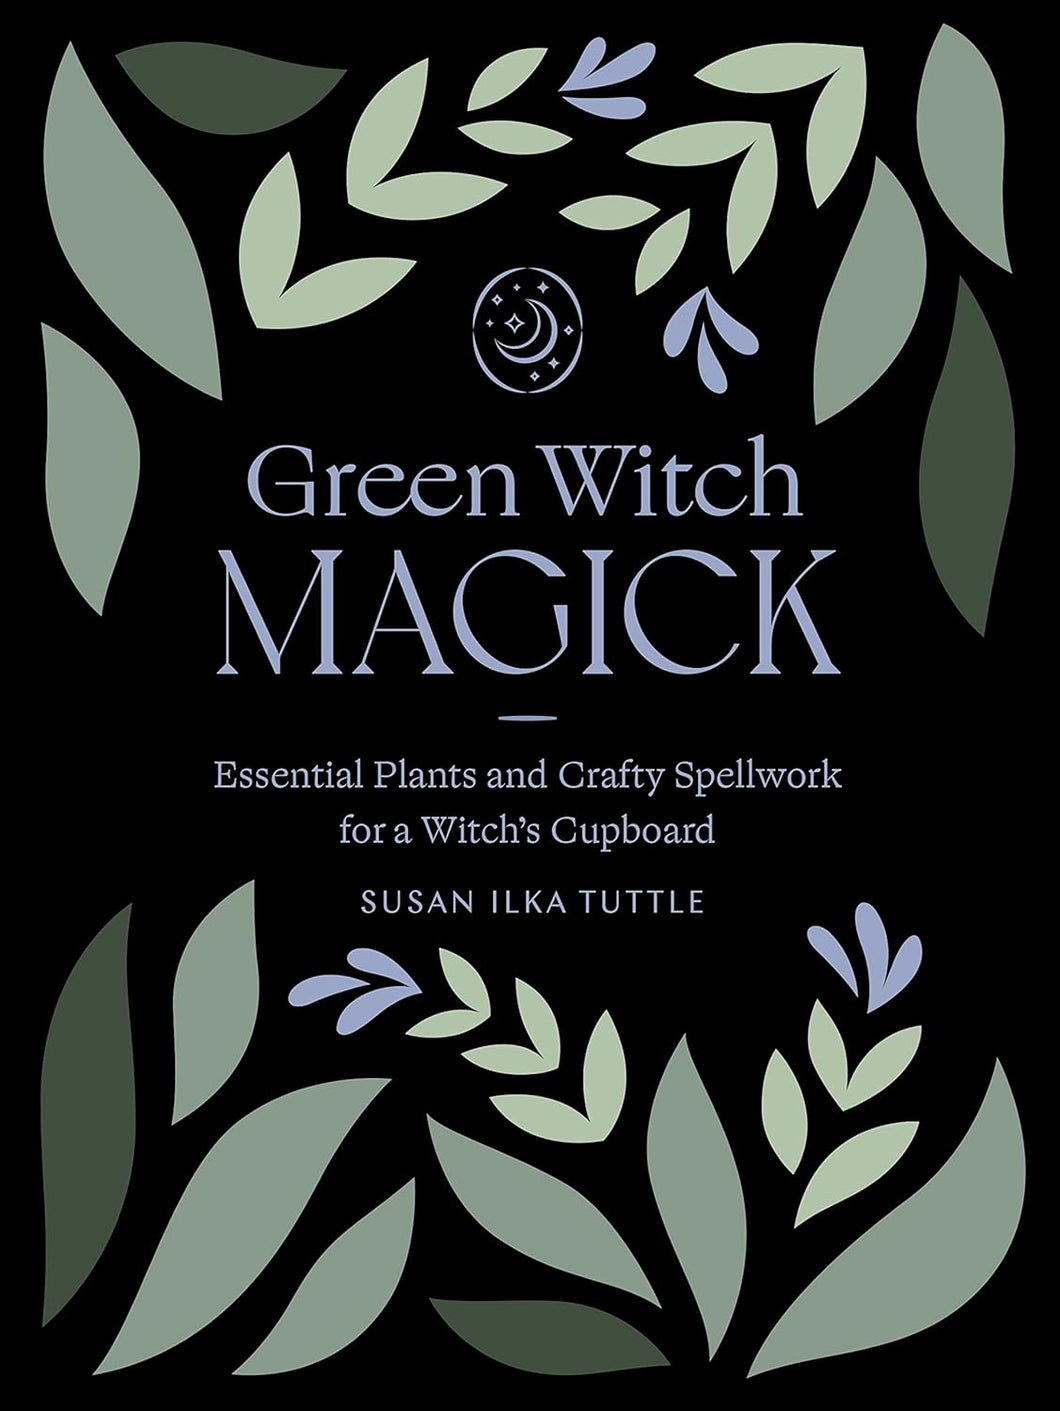 Green Witch Magick: Essential Plants and Crafty Spellwork for a Witch’s Cupboard